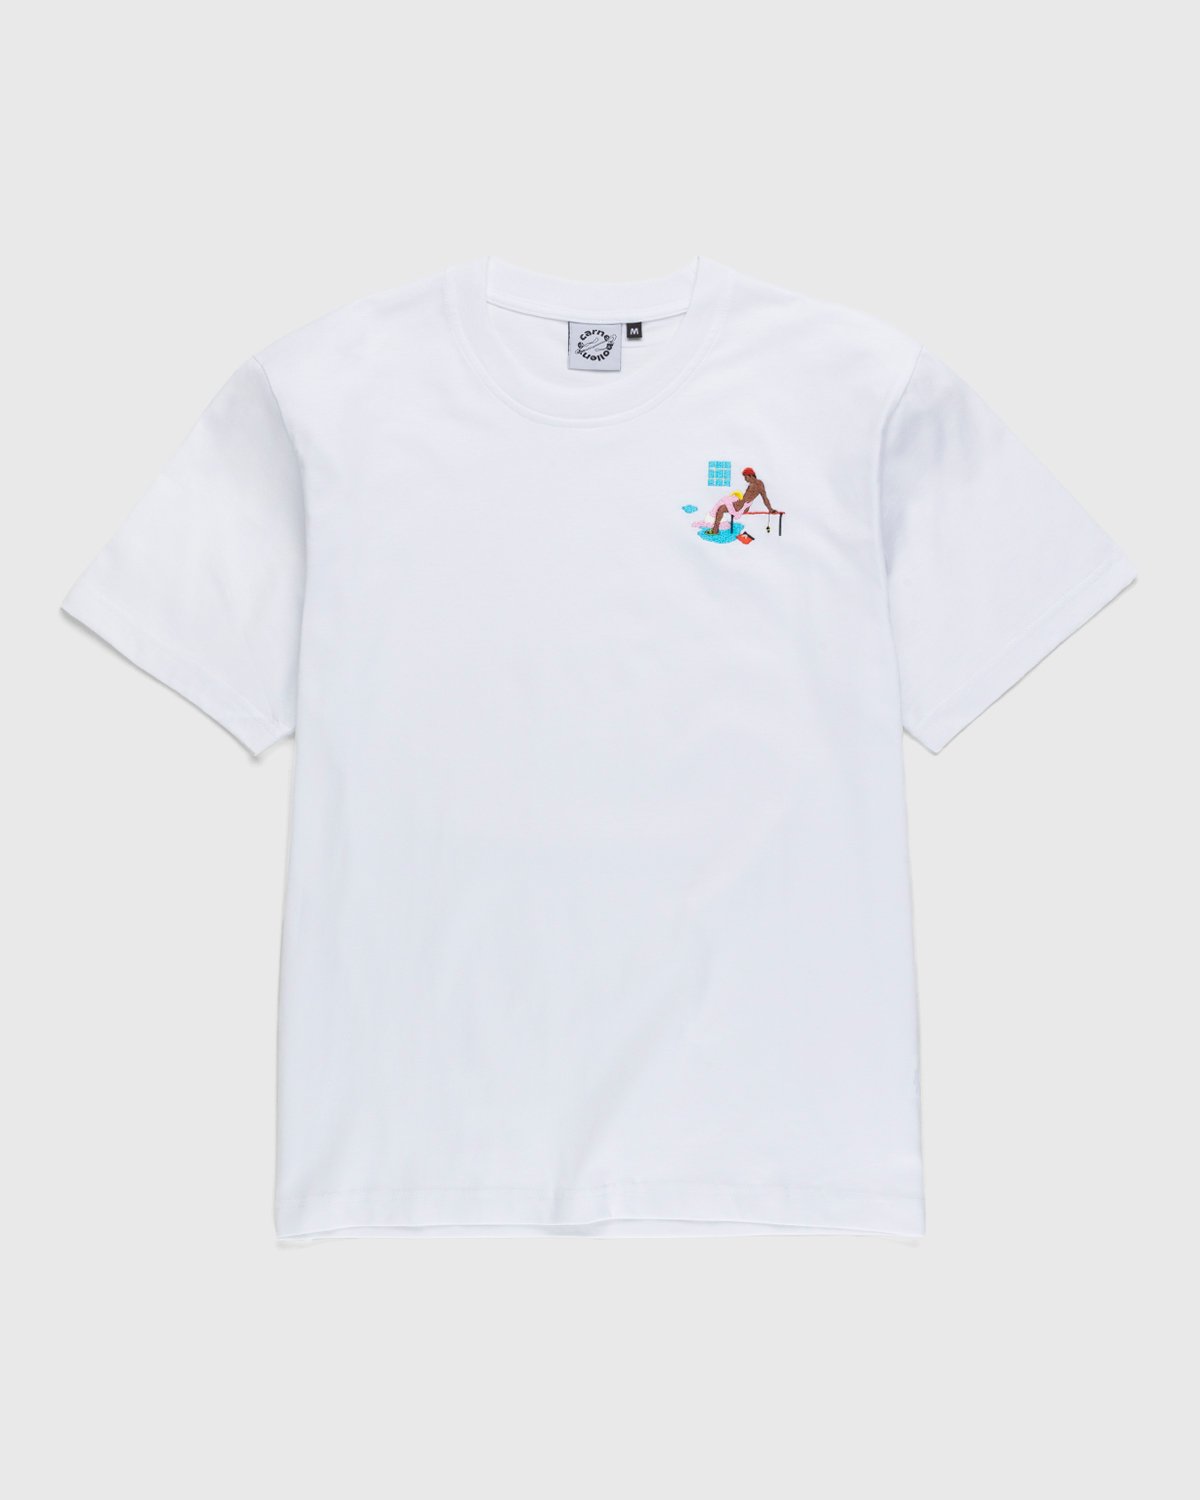 Carne Bollente - Deep Diving T-Shirt White - Clothing - White - Image 1